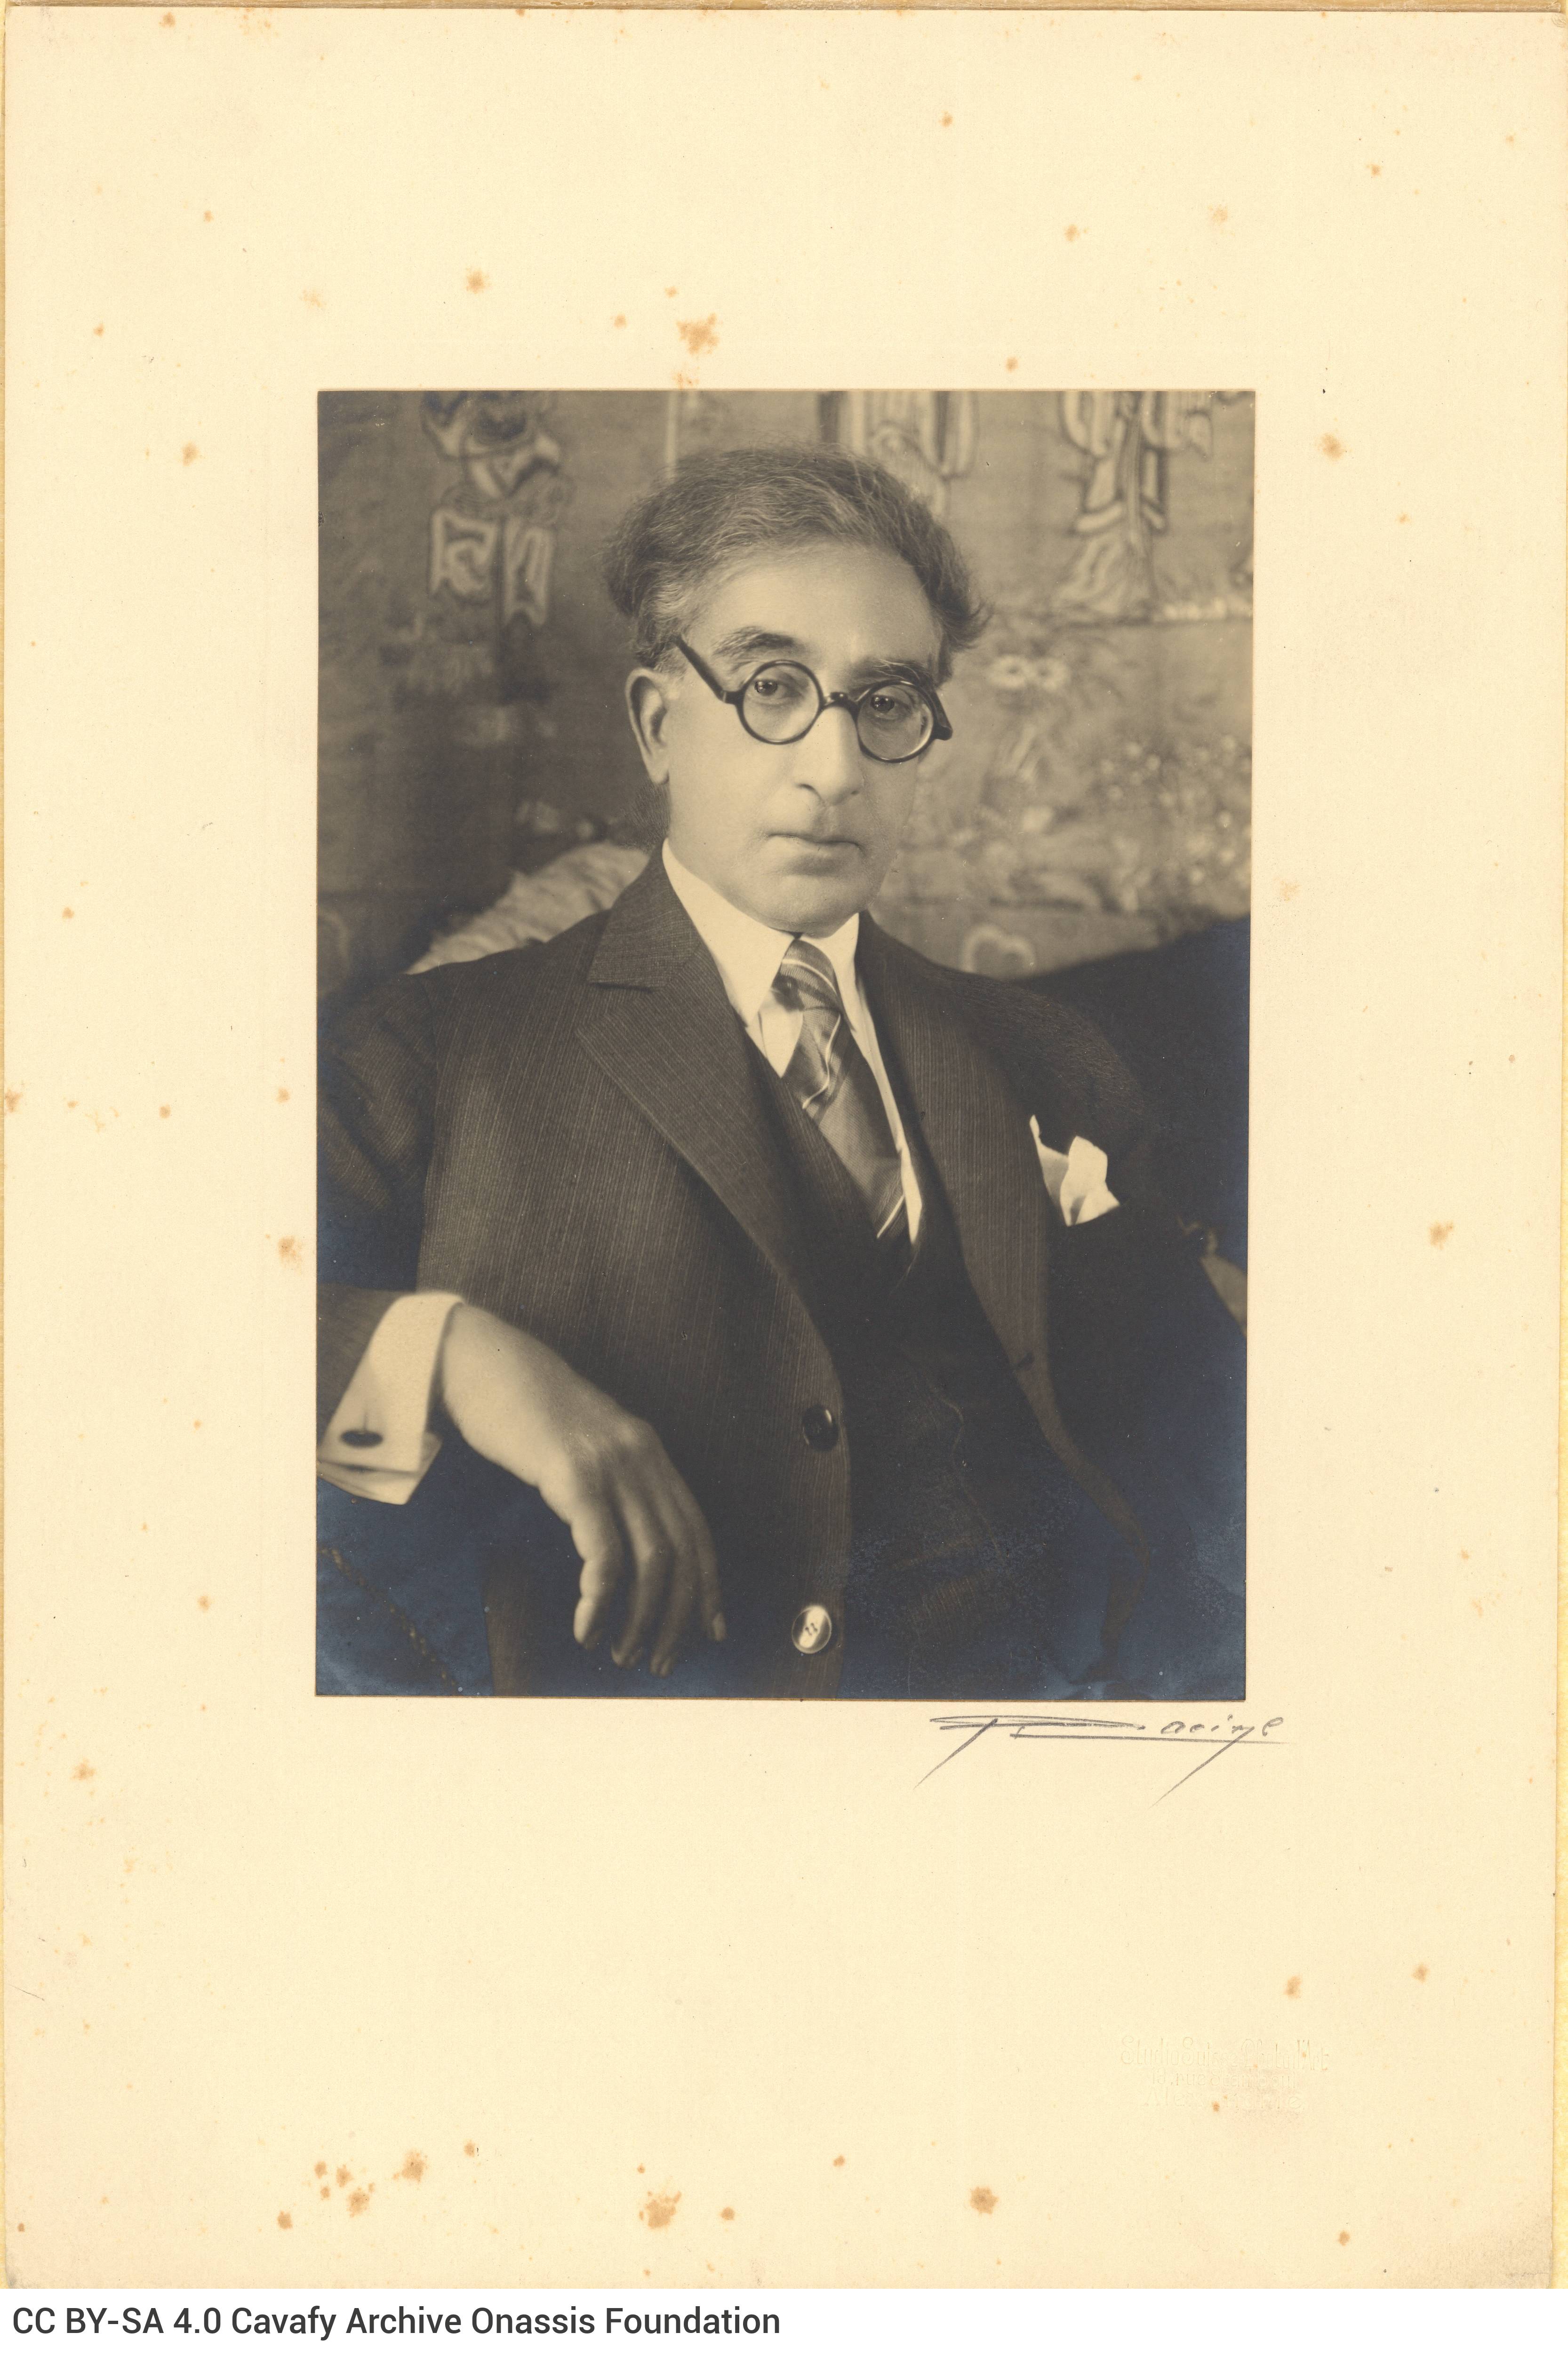 Photographic portrait of Cavafy at a mature age in his flat, pasted on paperboard and covered in rice paper with the logo of 